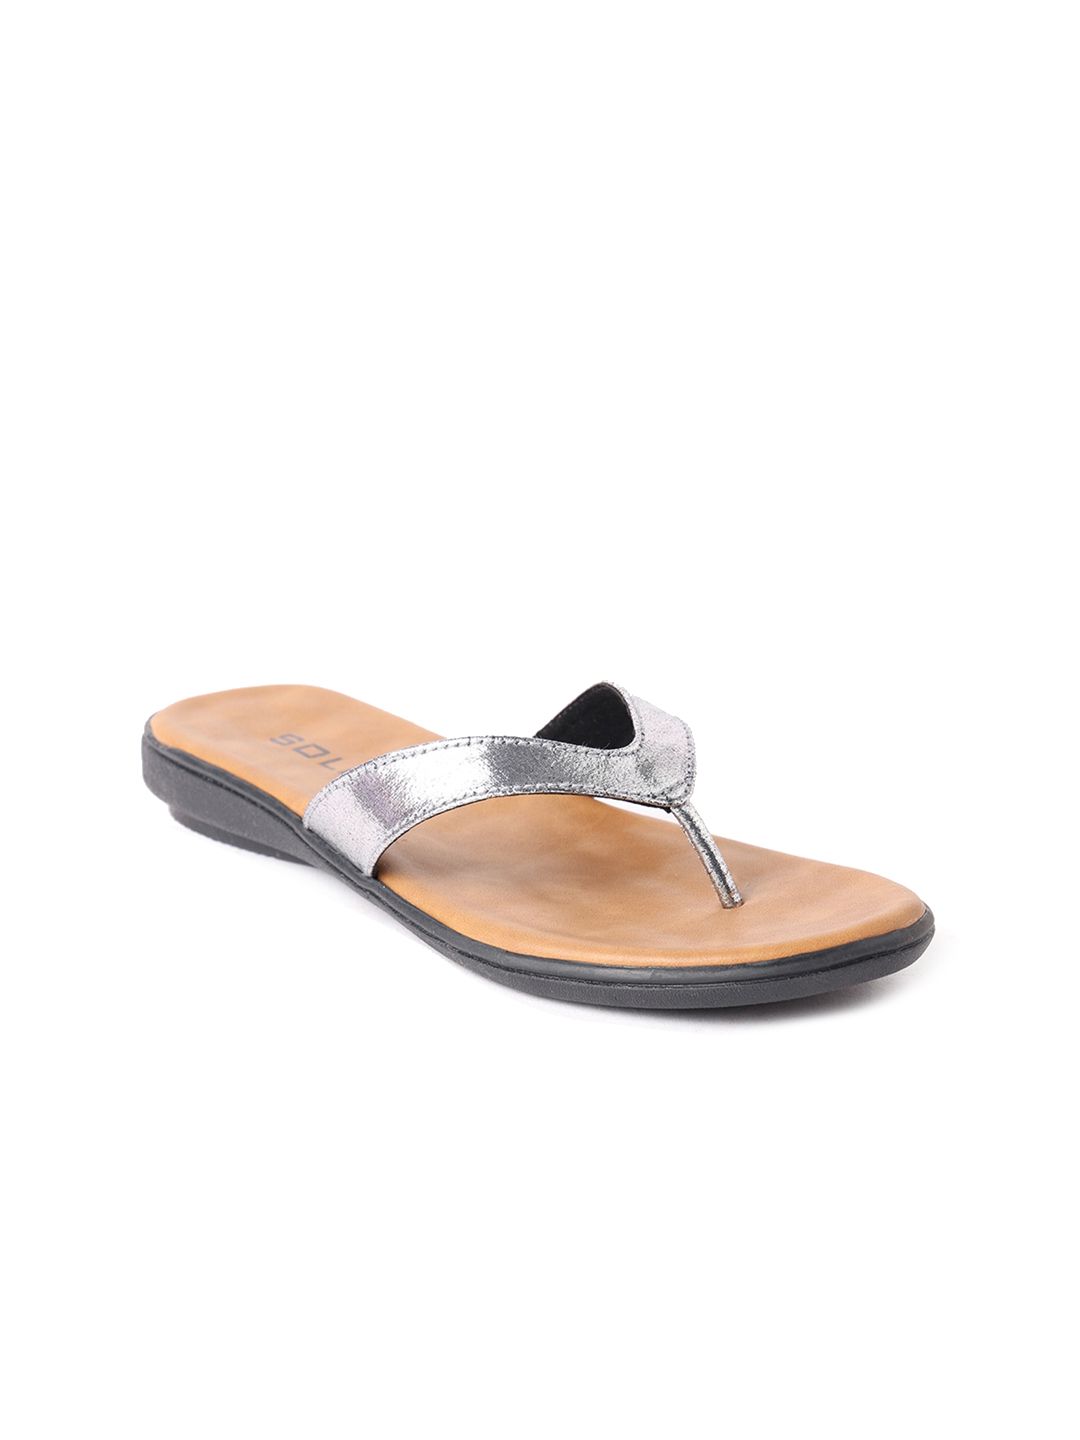 SOLES Textured T-Strap Flats Price in India